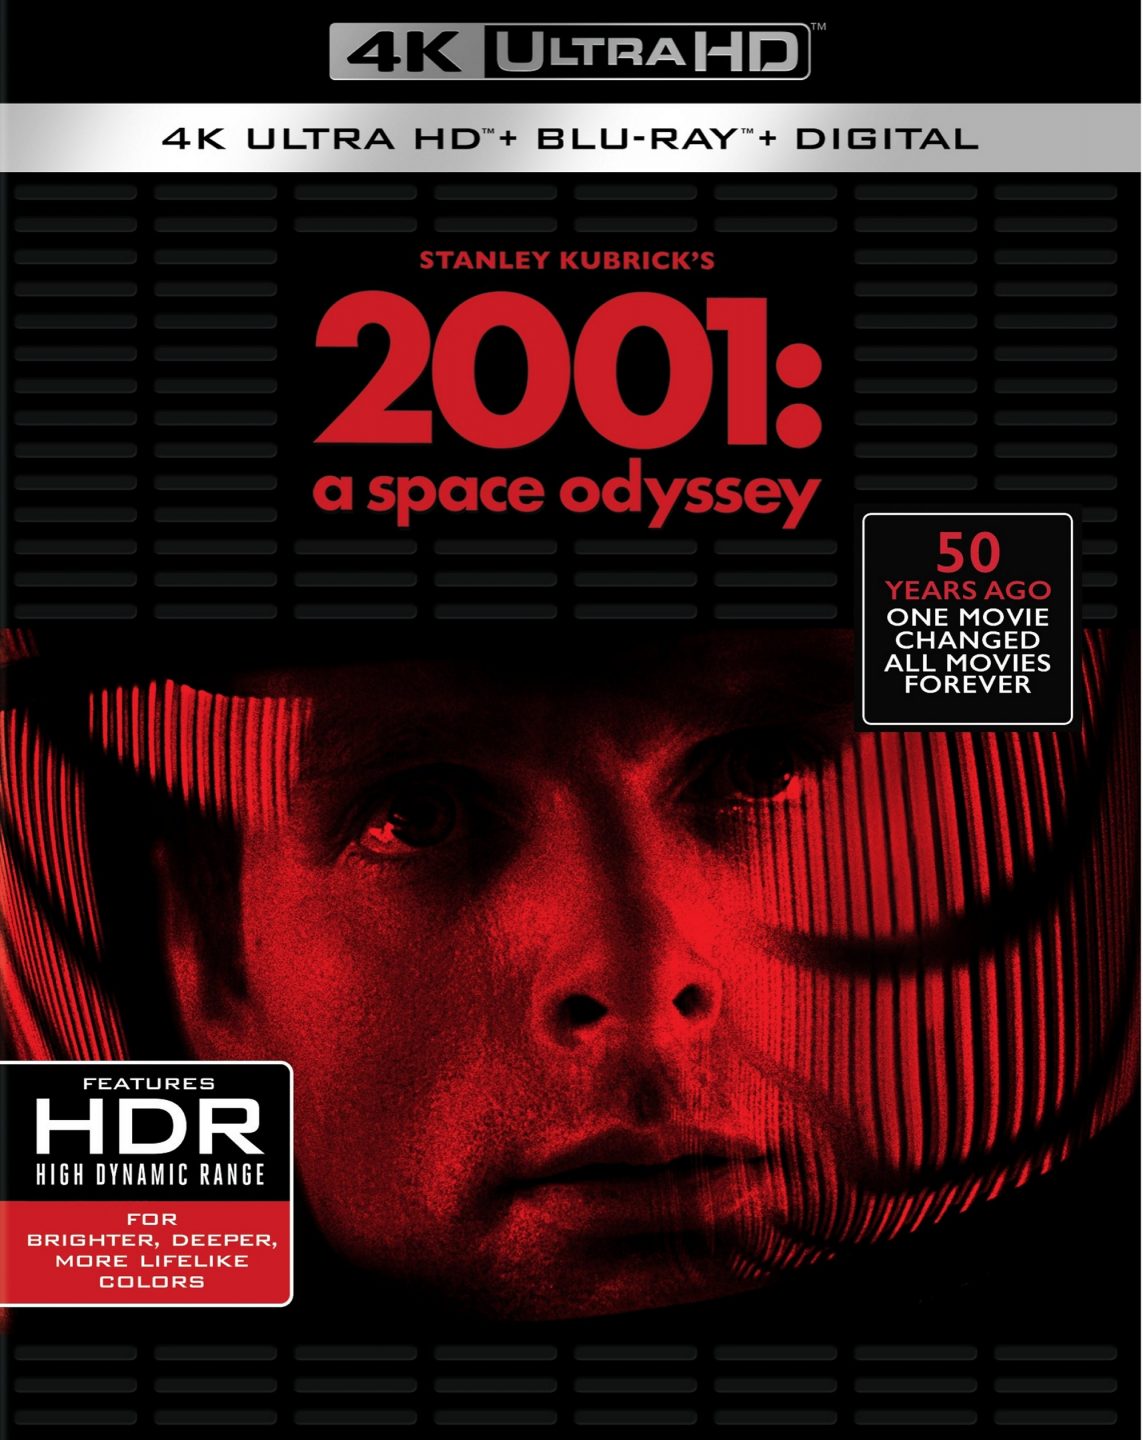 2001: A Space Odyssey 4K Ultra HD Combo Pack (Warner Bros. Home Entertainment)